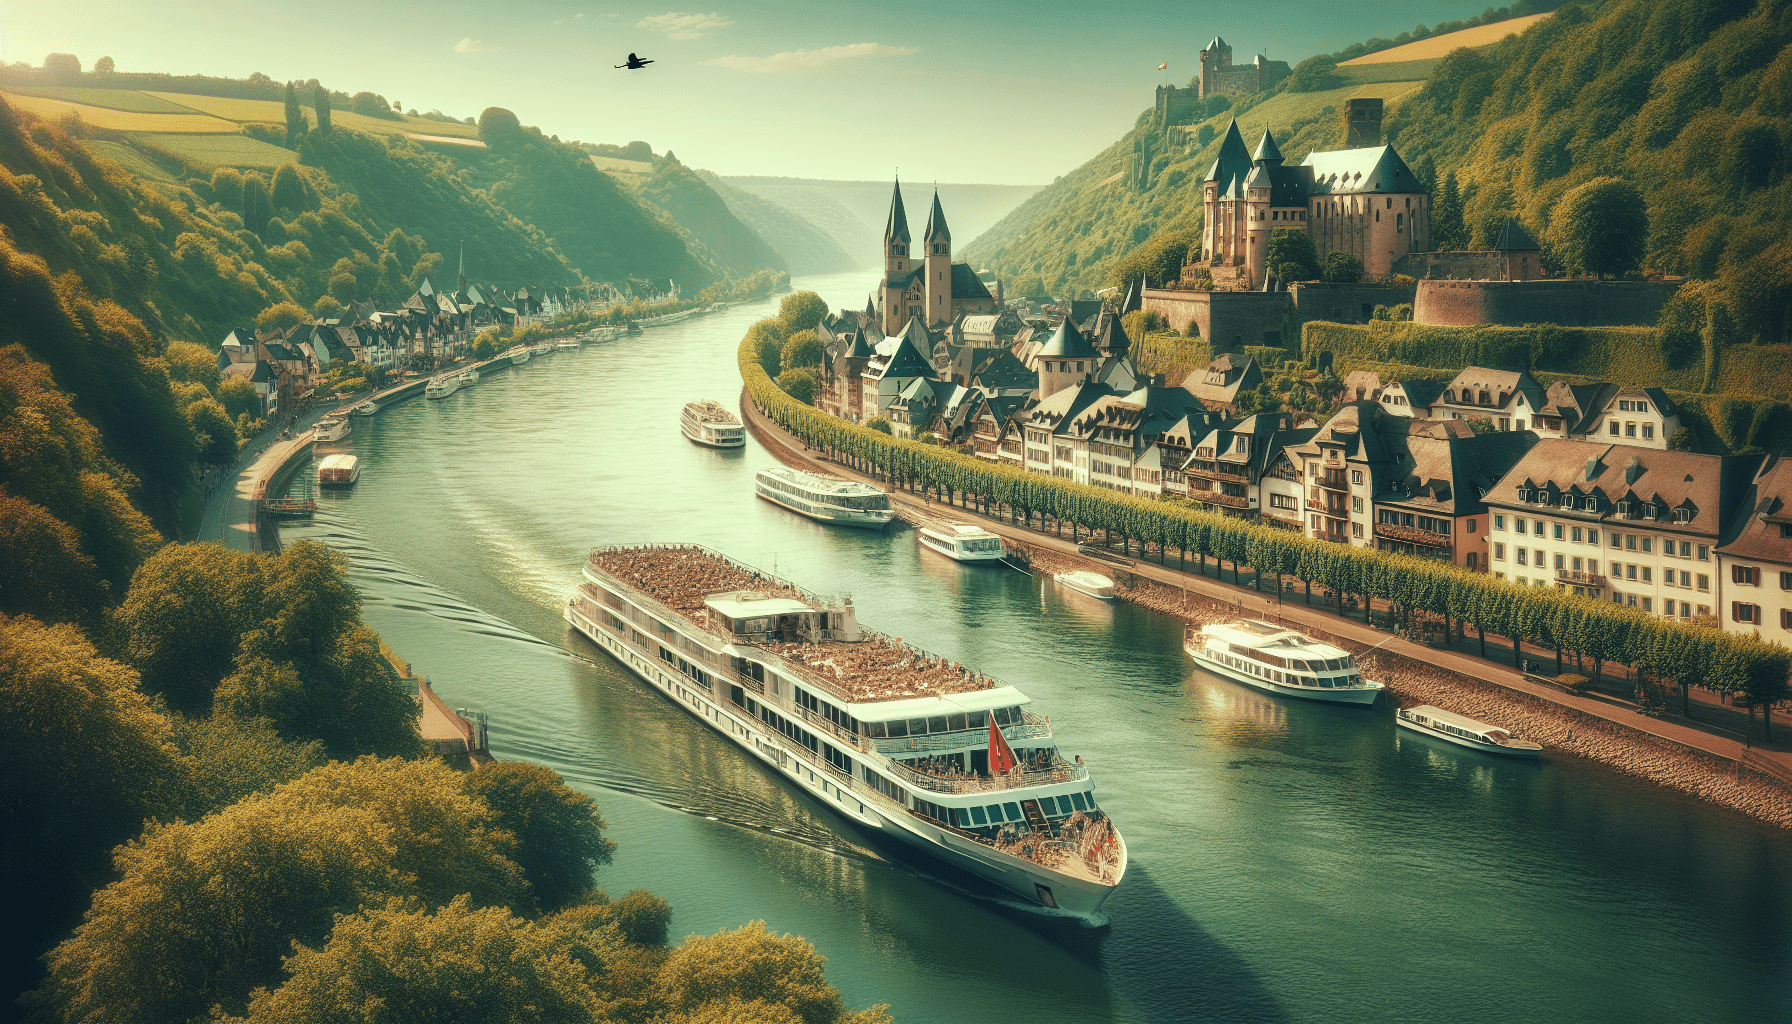 How Much Is A Cruise Down The Rhine River?